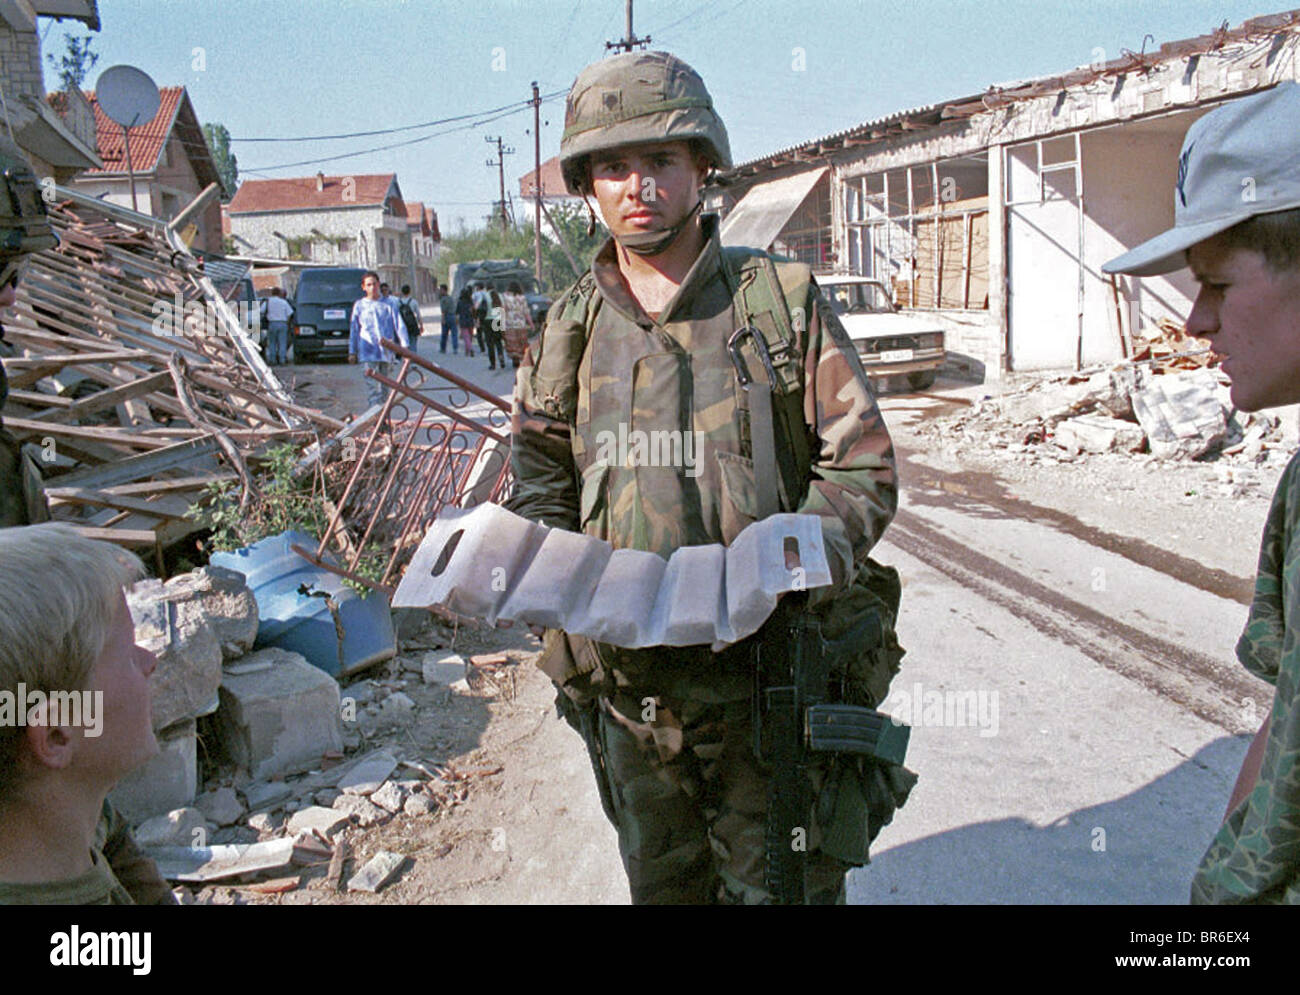 An American soldier removes plastic explosives from a bombed building outside Pristina, Kosovo. Stock Photo